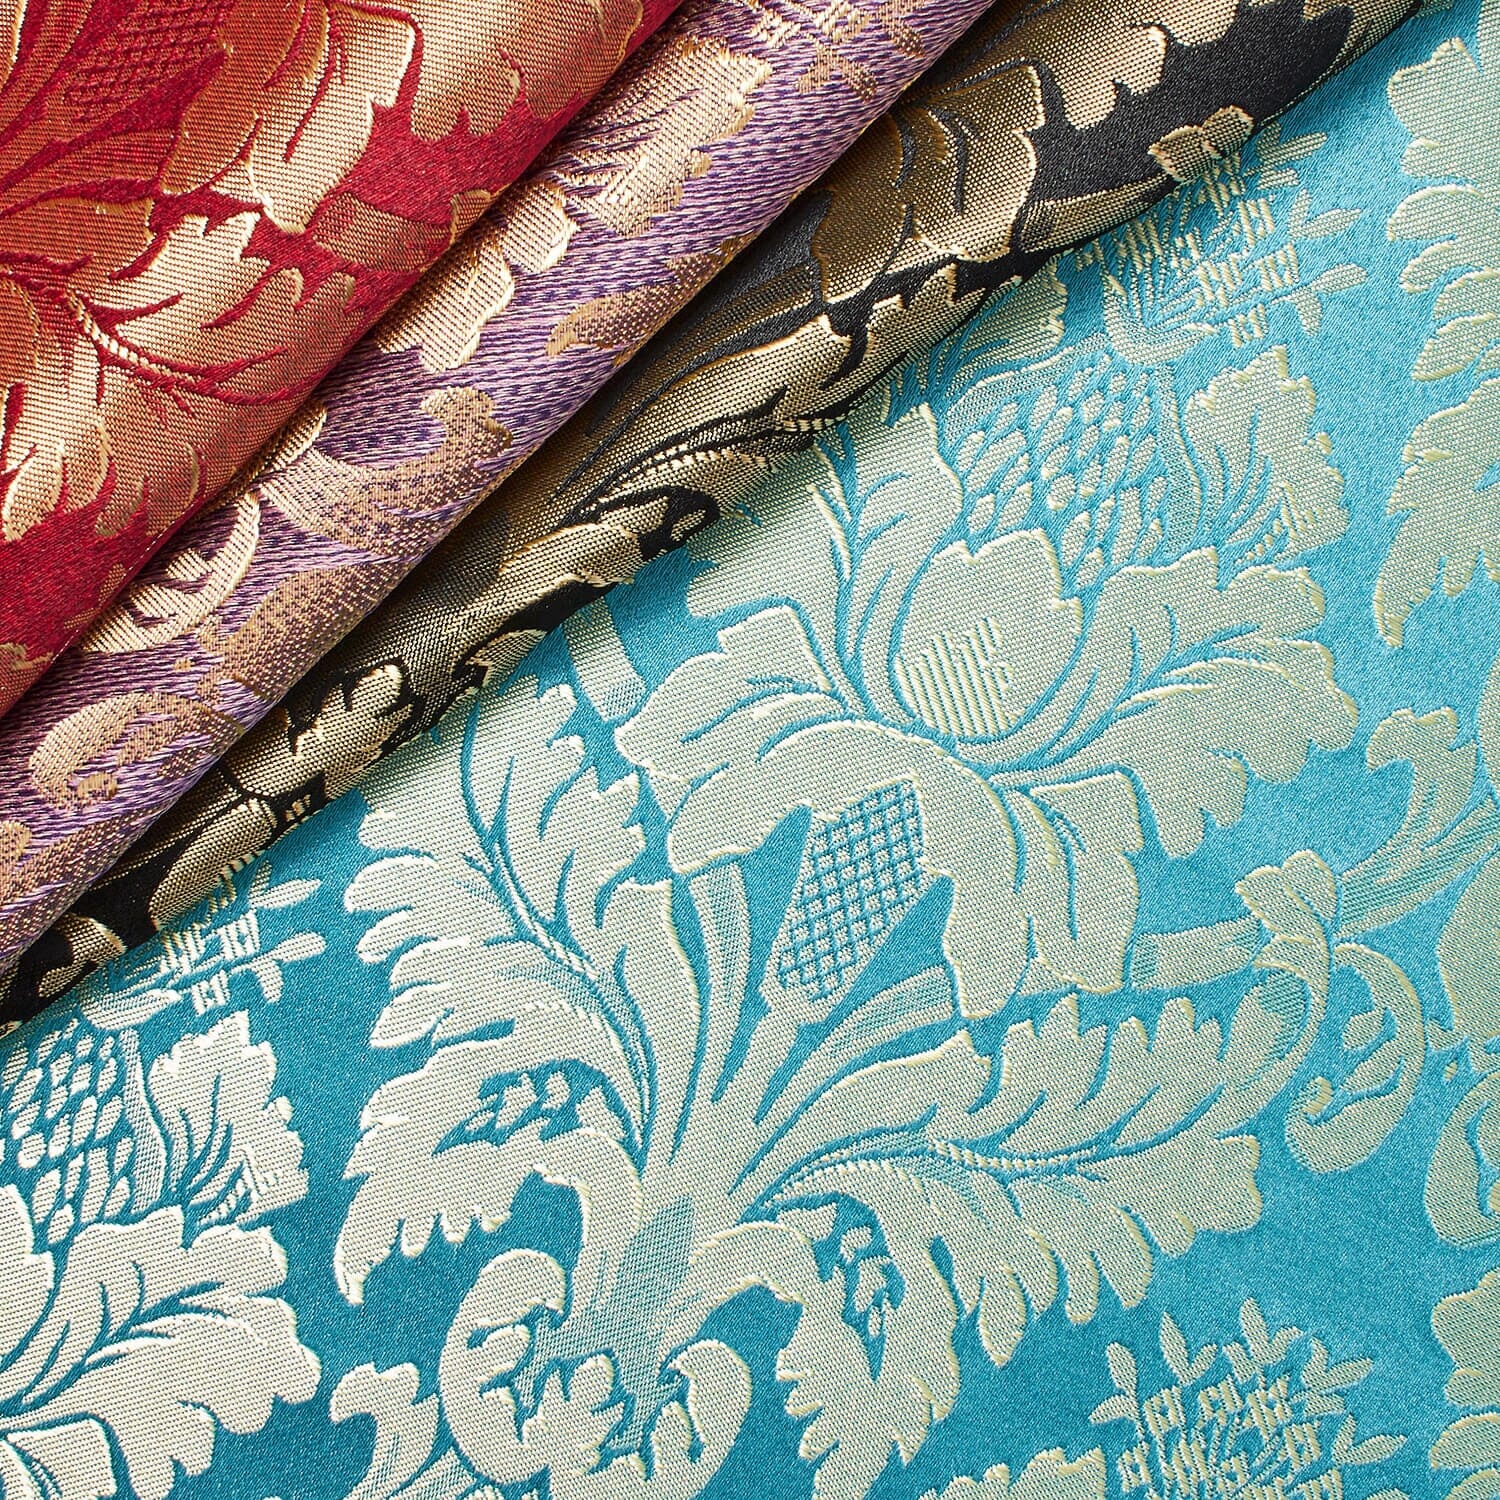 Jacquard Fabric - 11 most important questions